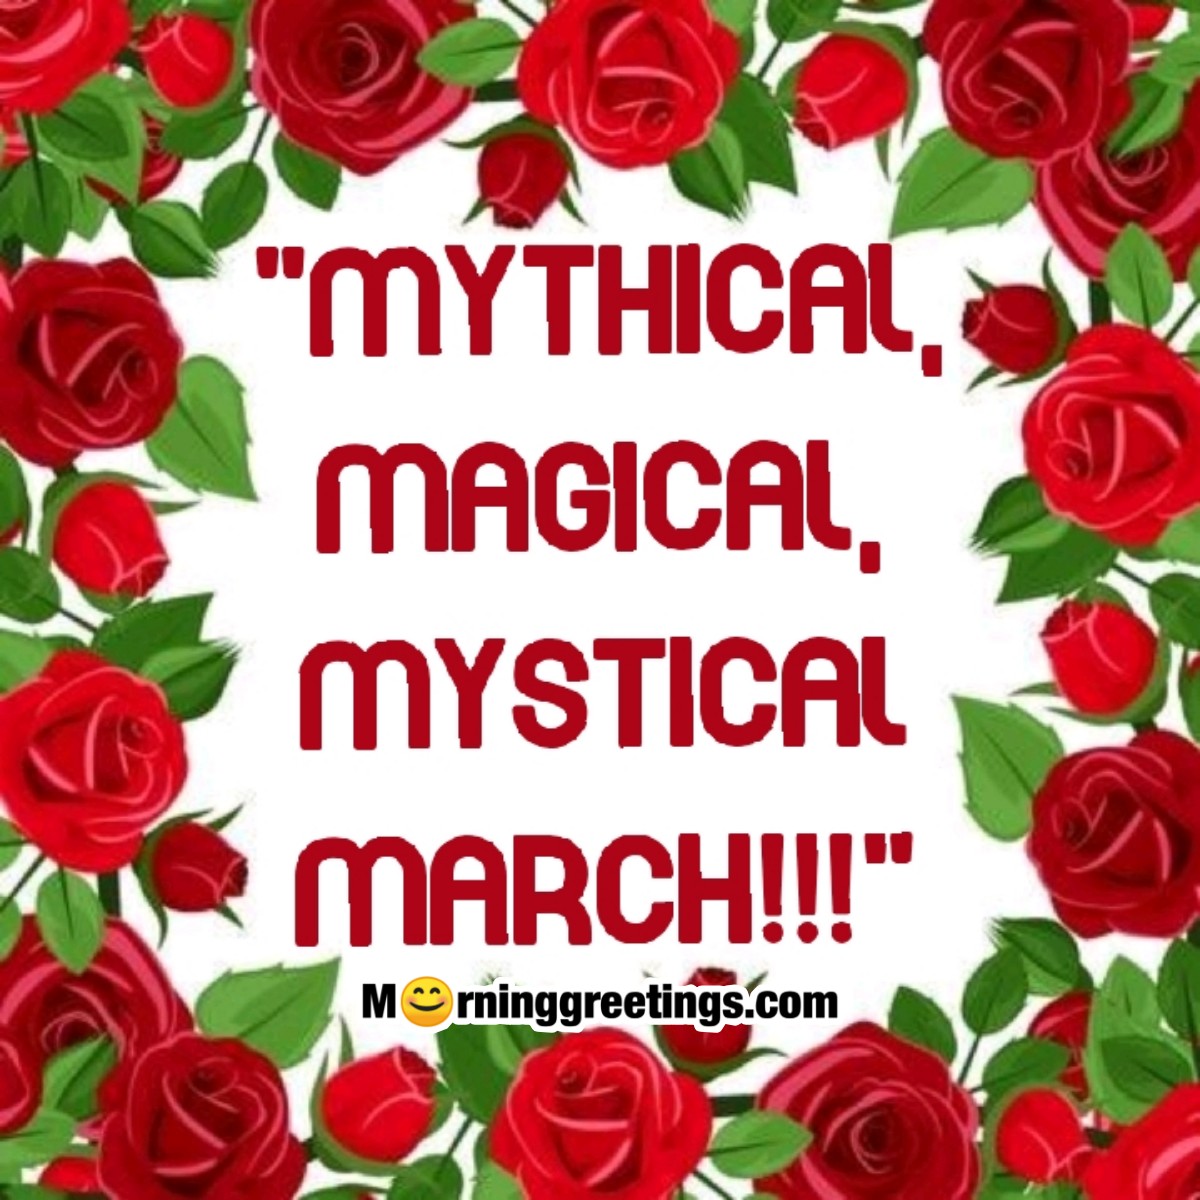 Mythical, Magical, Mystical March